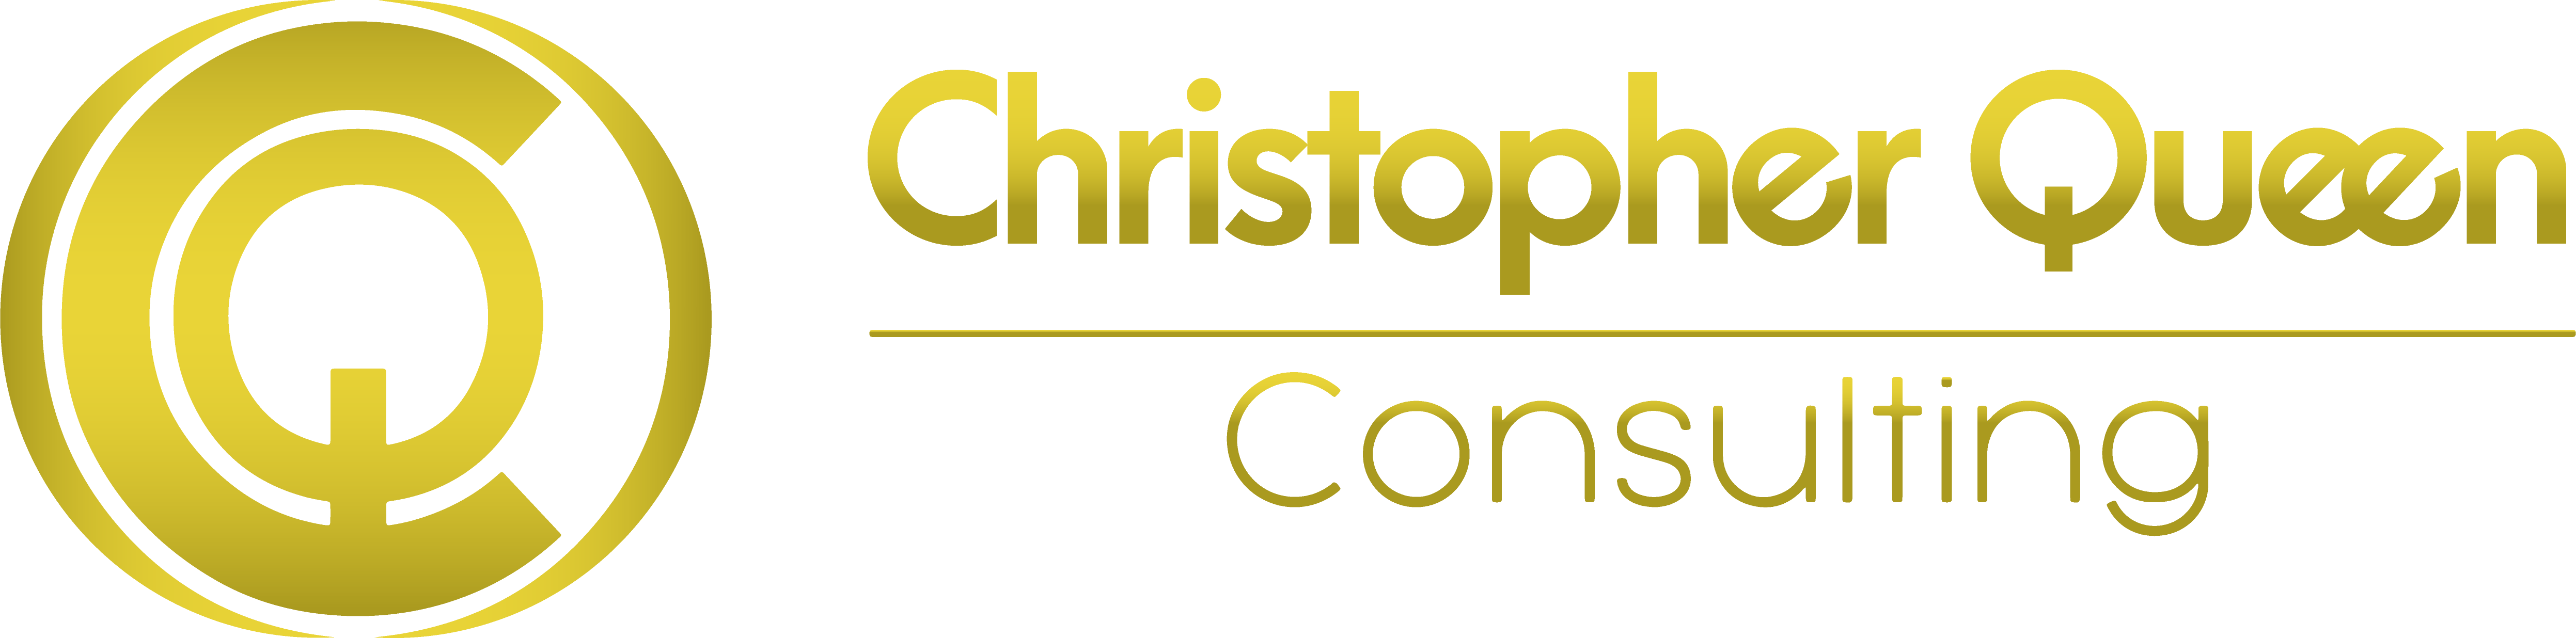 Christopher Queen Consulting